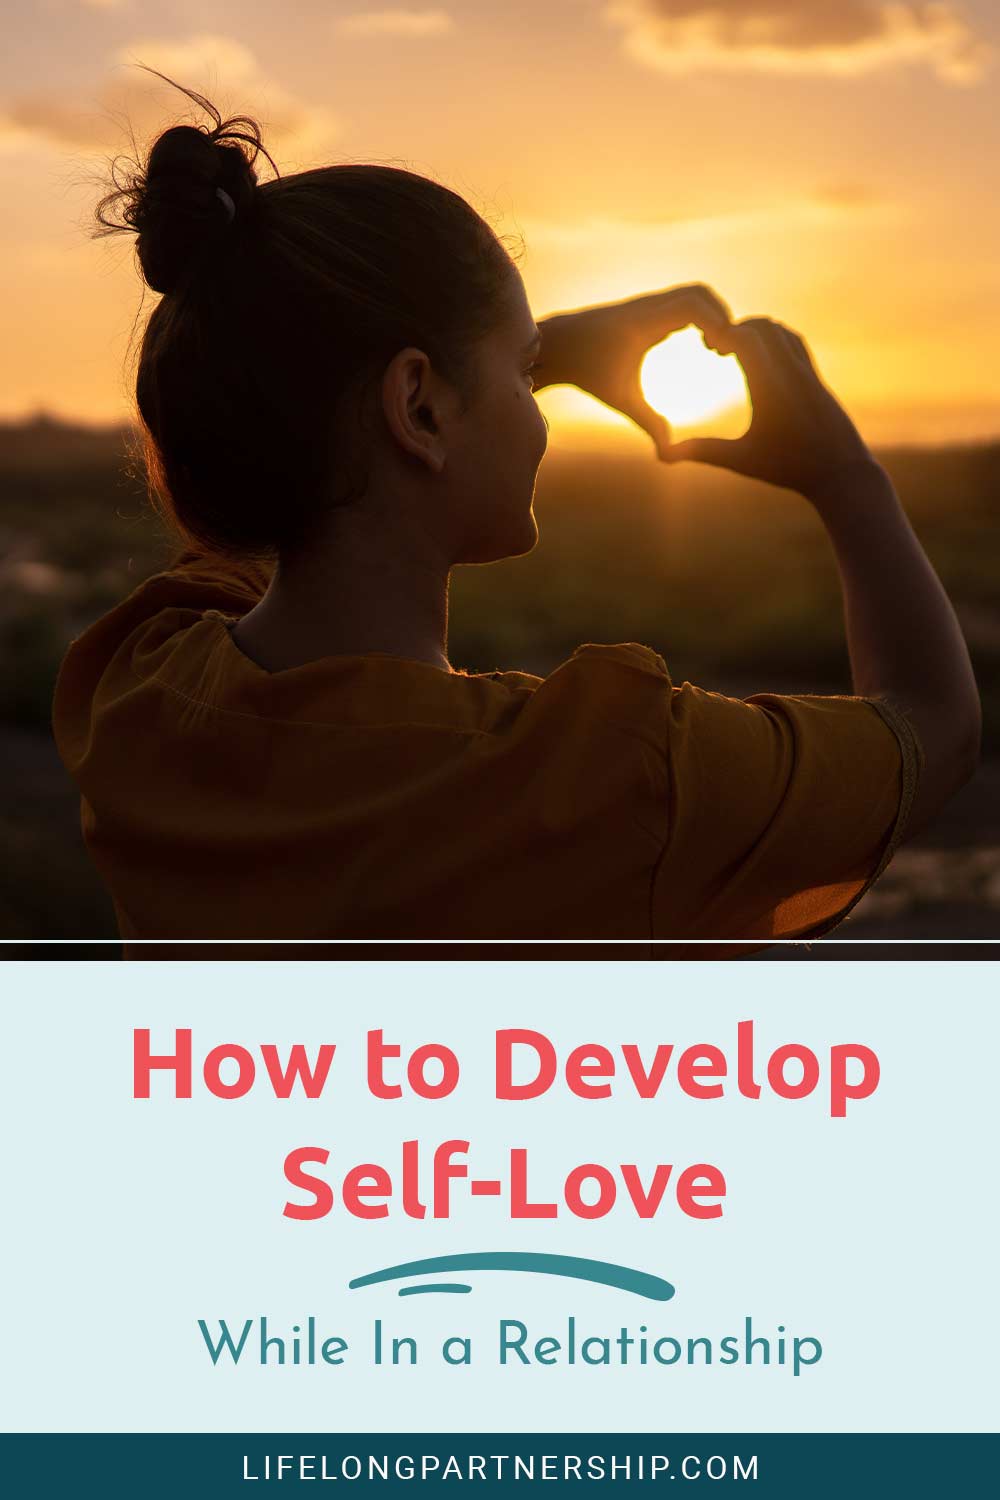 Lady wearing yellow tops facing to the sun and showing love symbol with fingers - How to Develop Self-Love While In a Relationship.